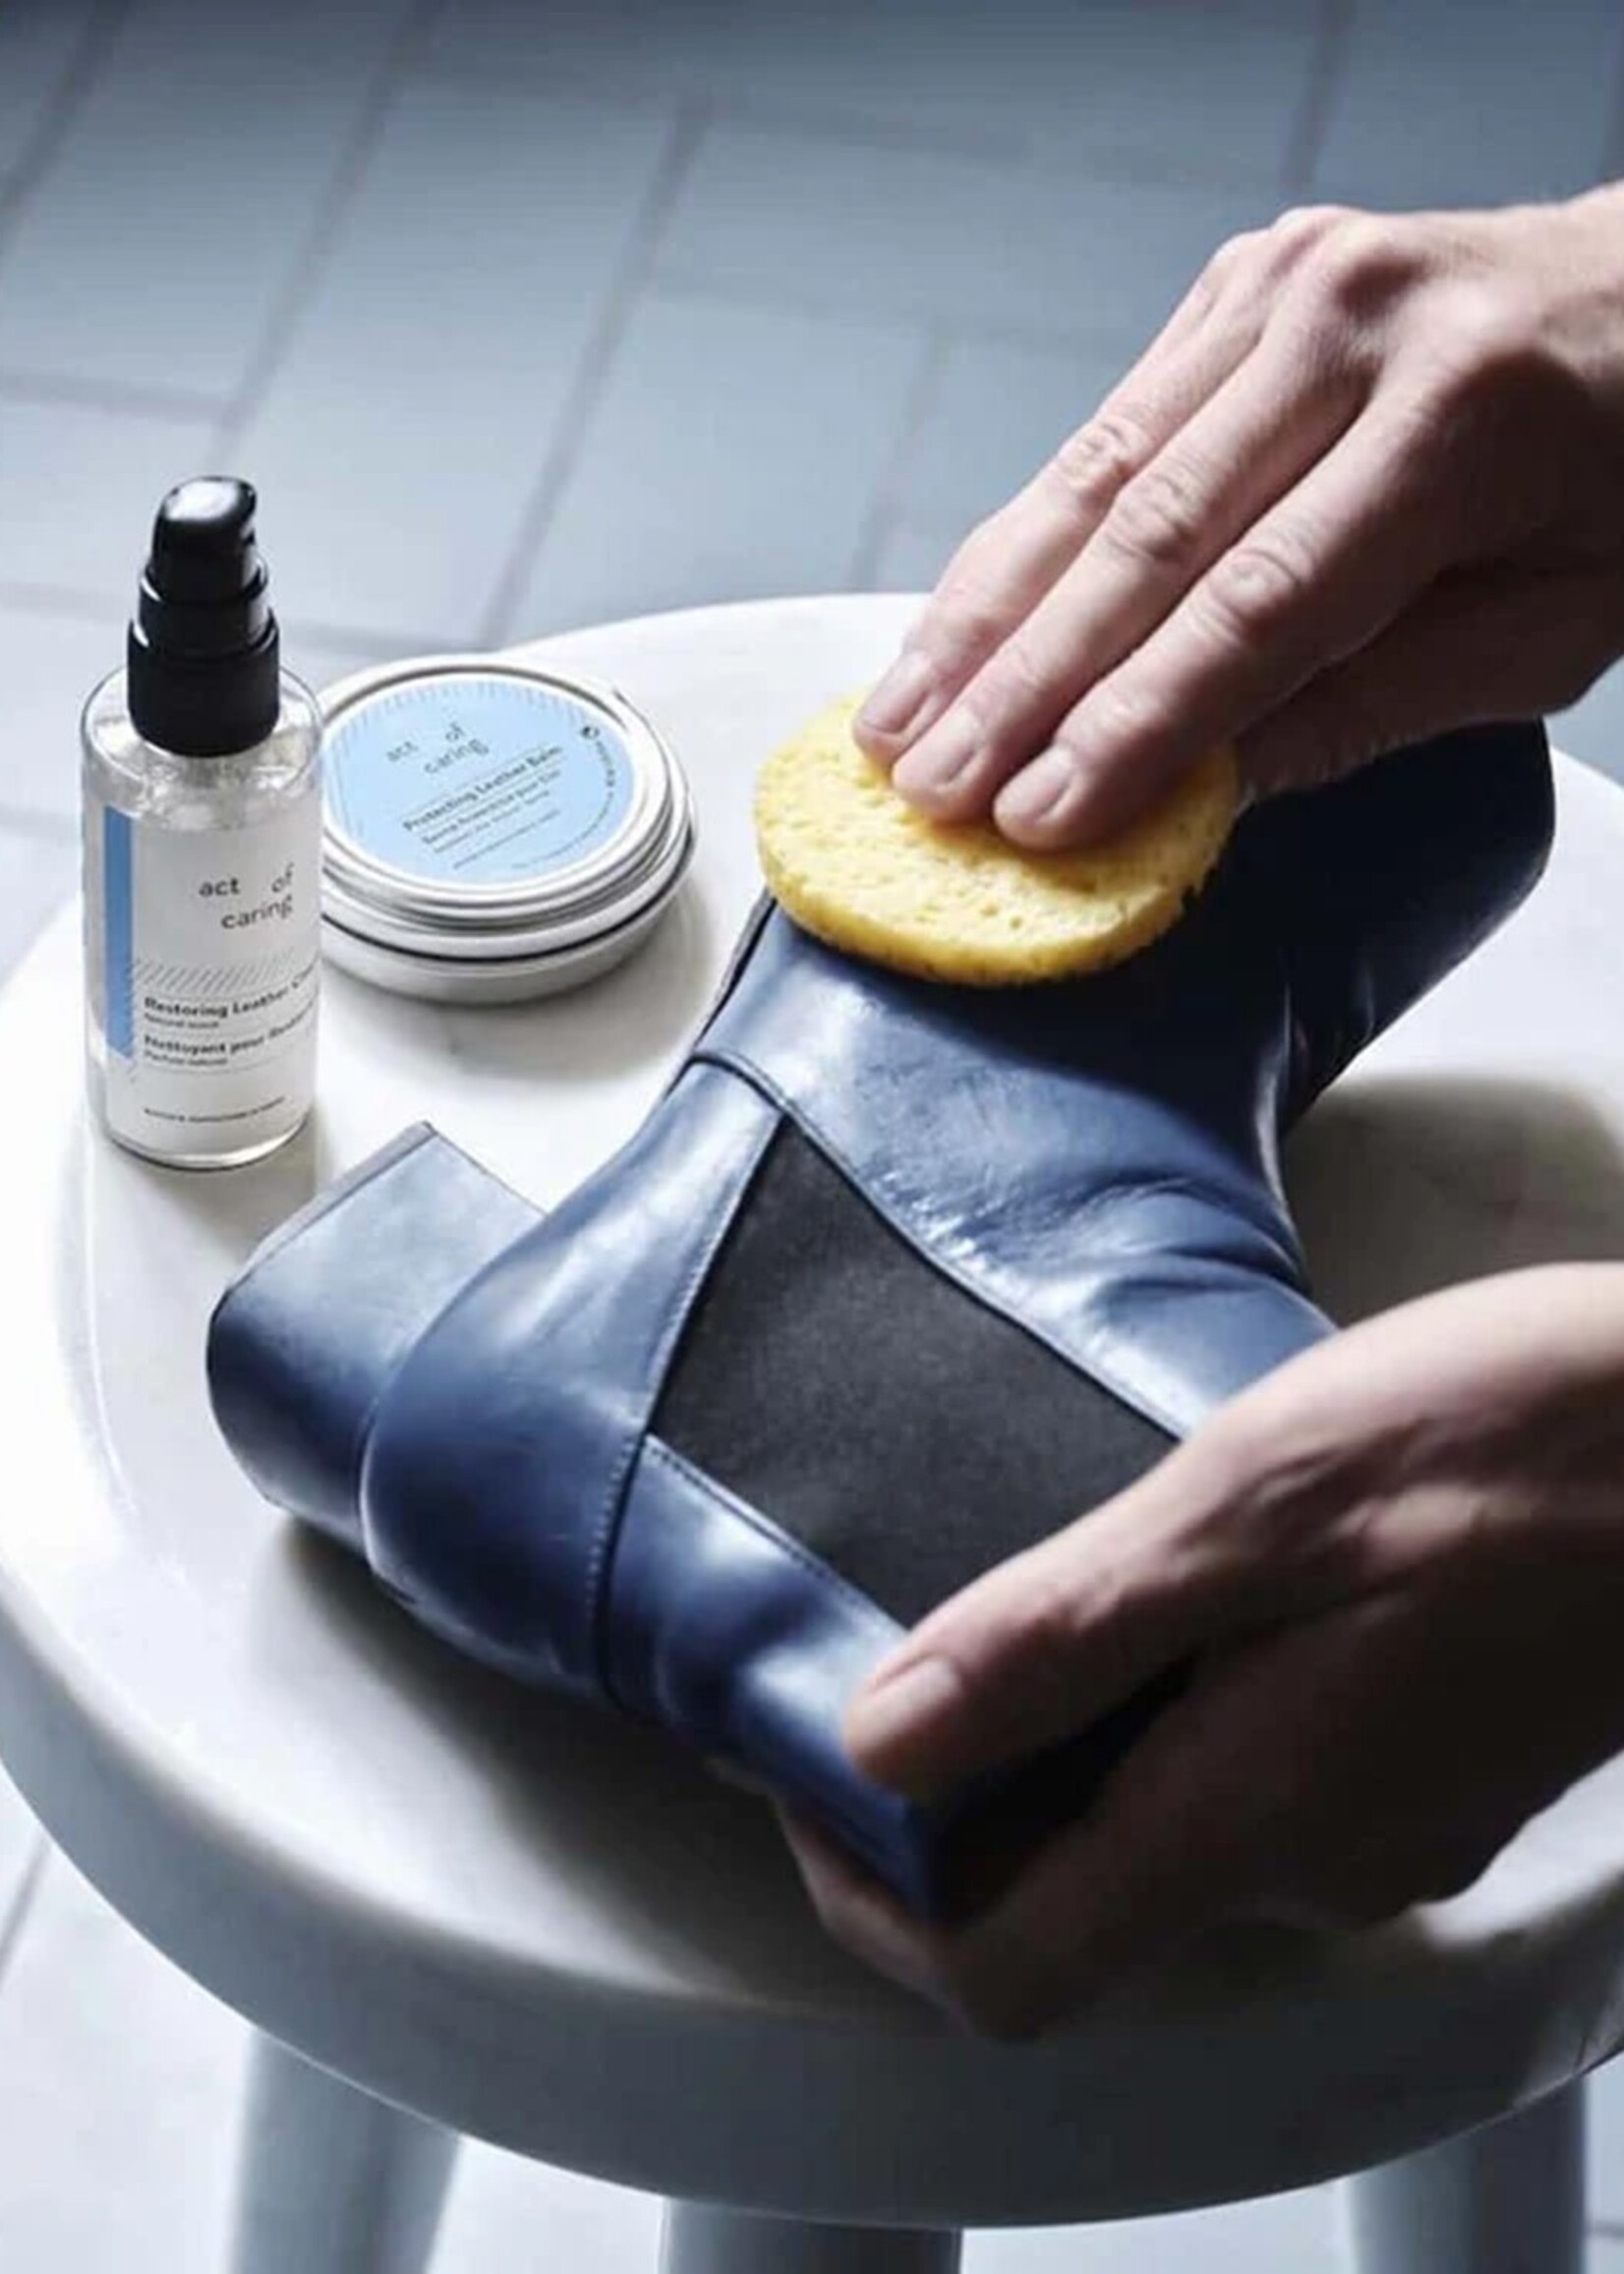 ACT OF CARING LEATHER CARE KIT